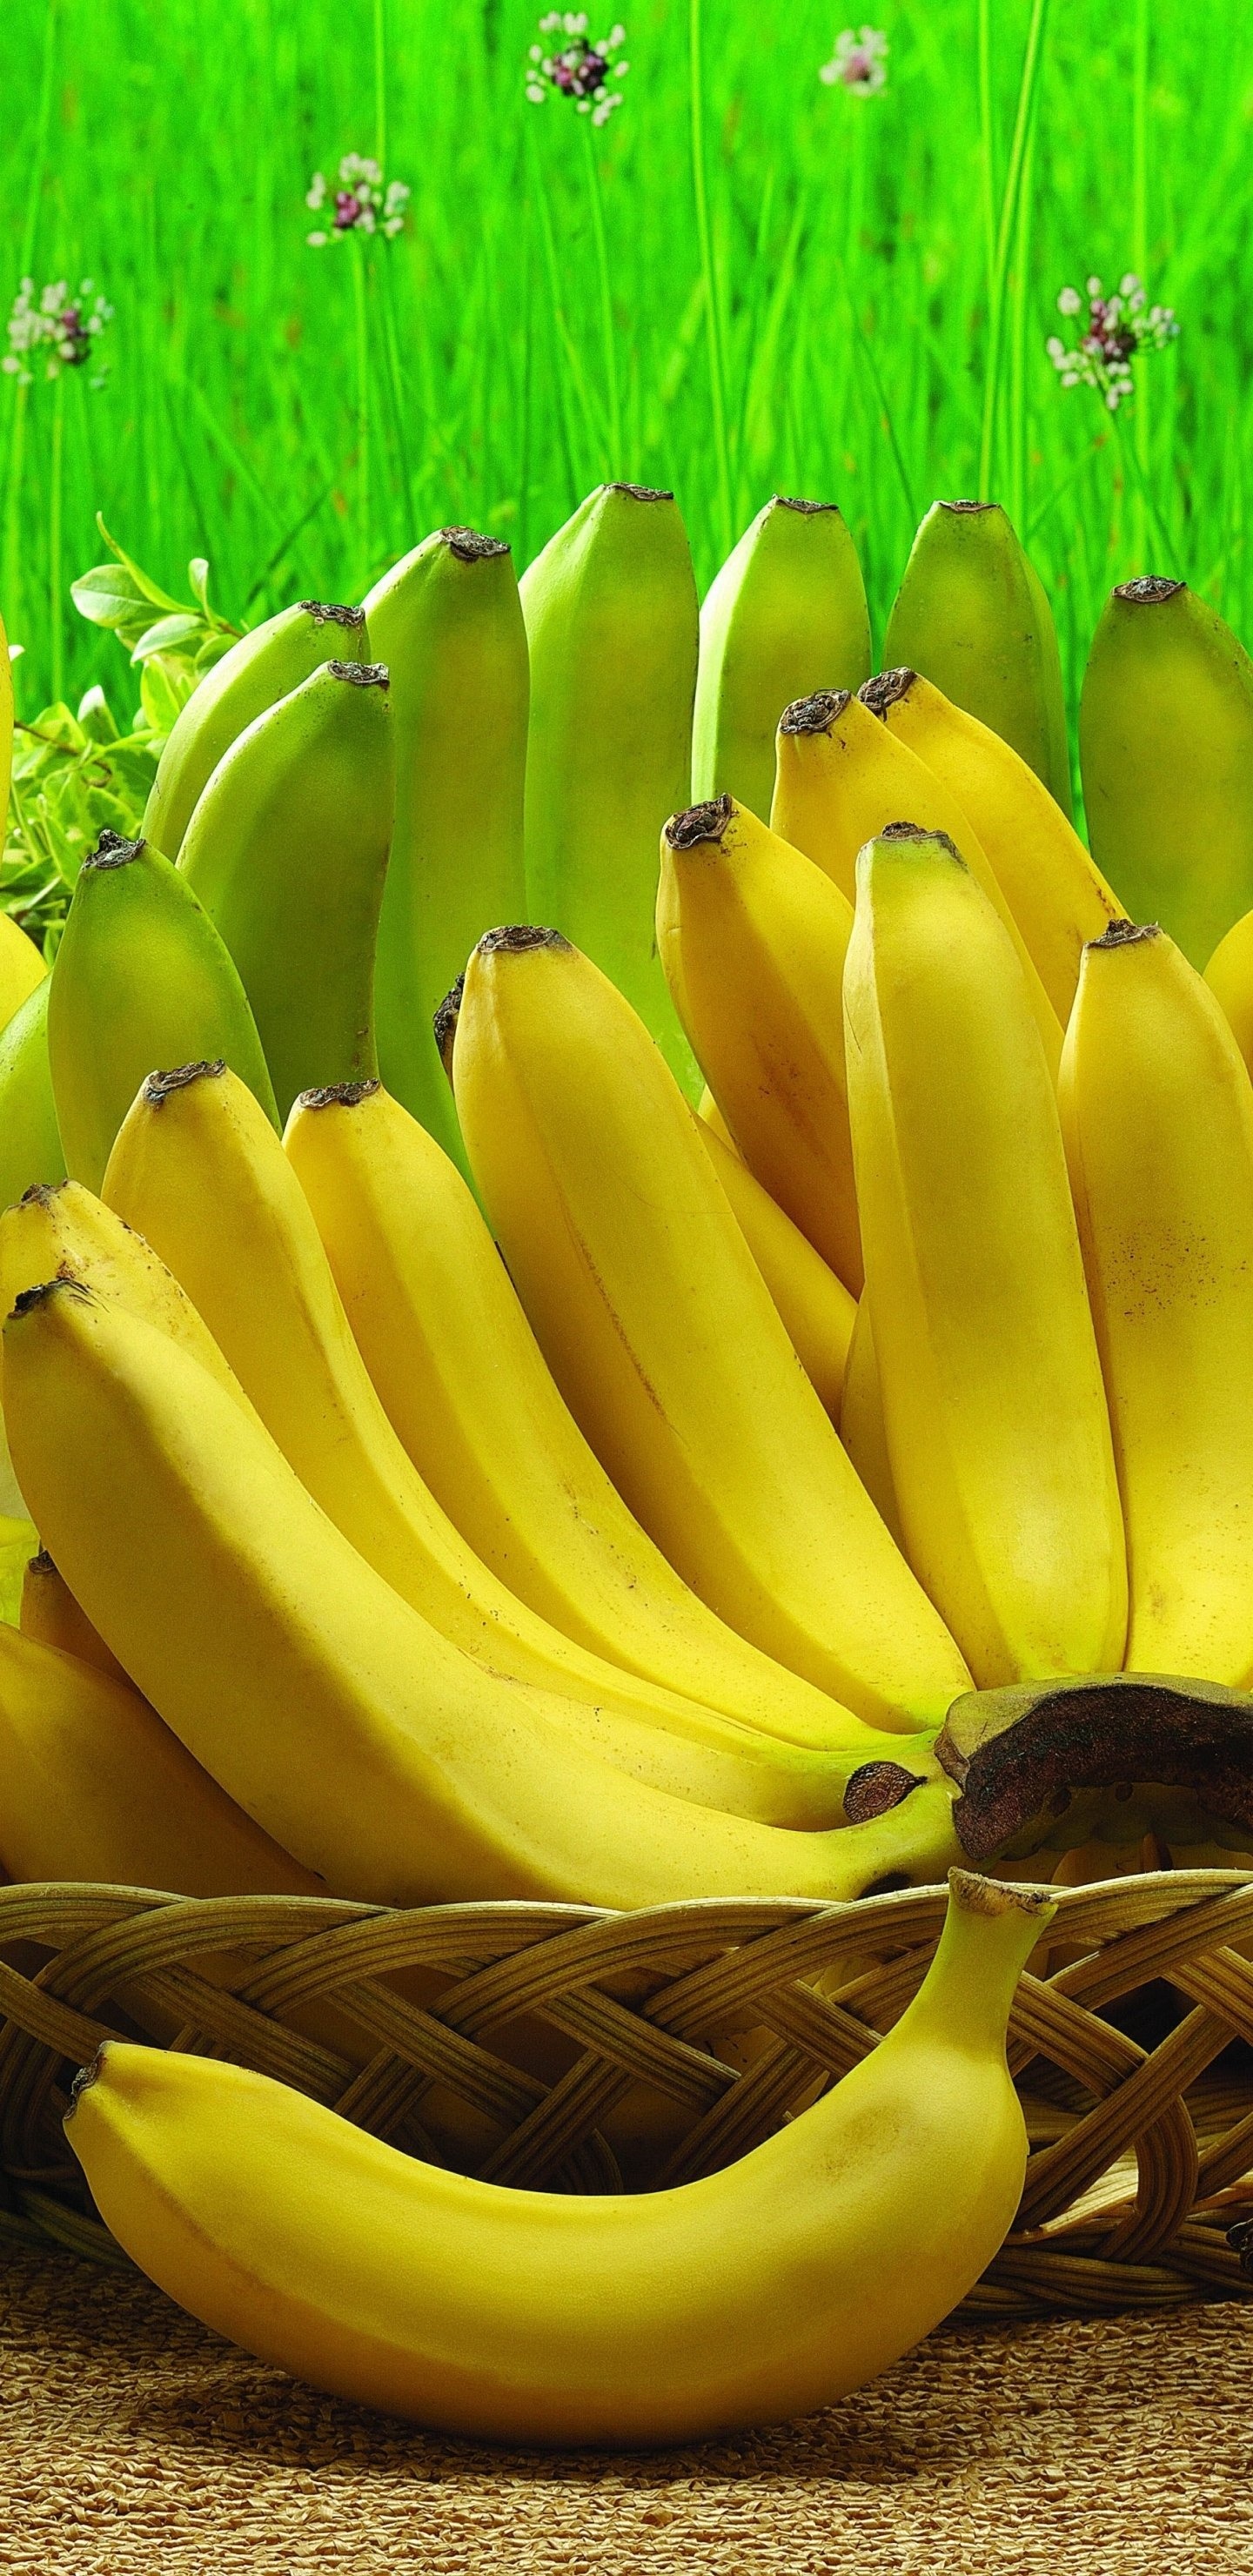 Banana feast, Culinary delight, Nutritious goodness, Finger-licking satisfaction, 1440x2960 HD Phone